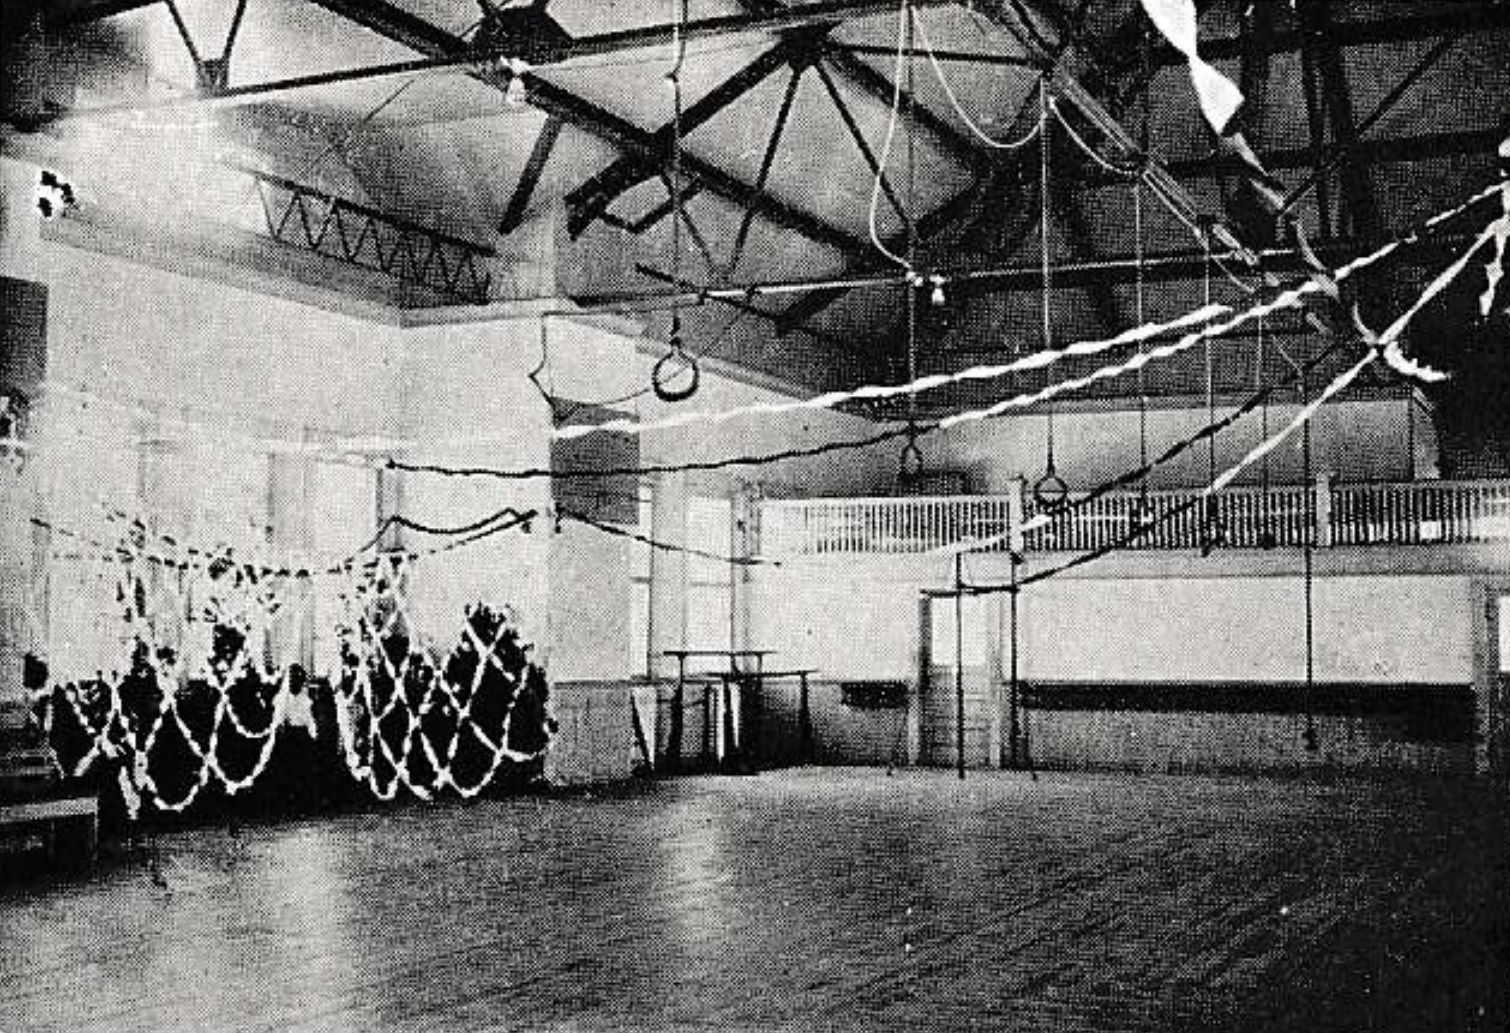 The Dixie Academy Building being decorated for a dance